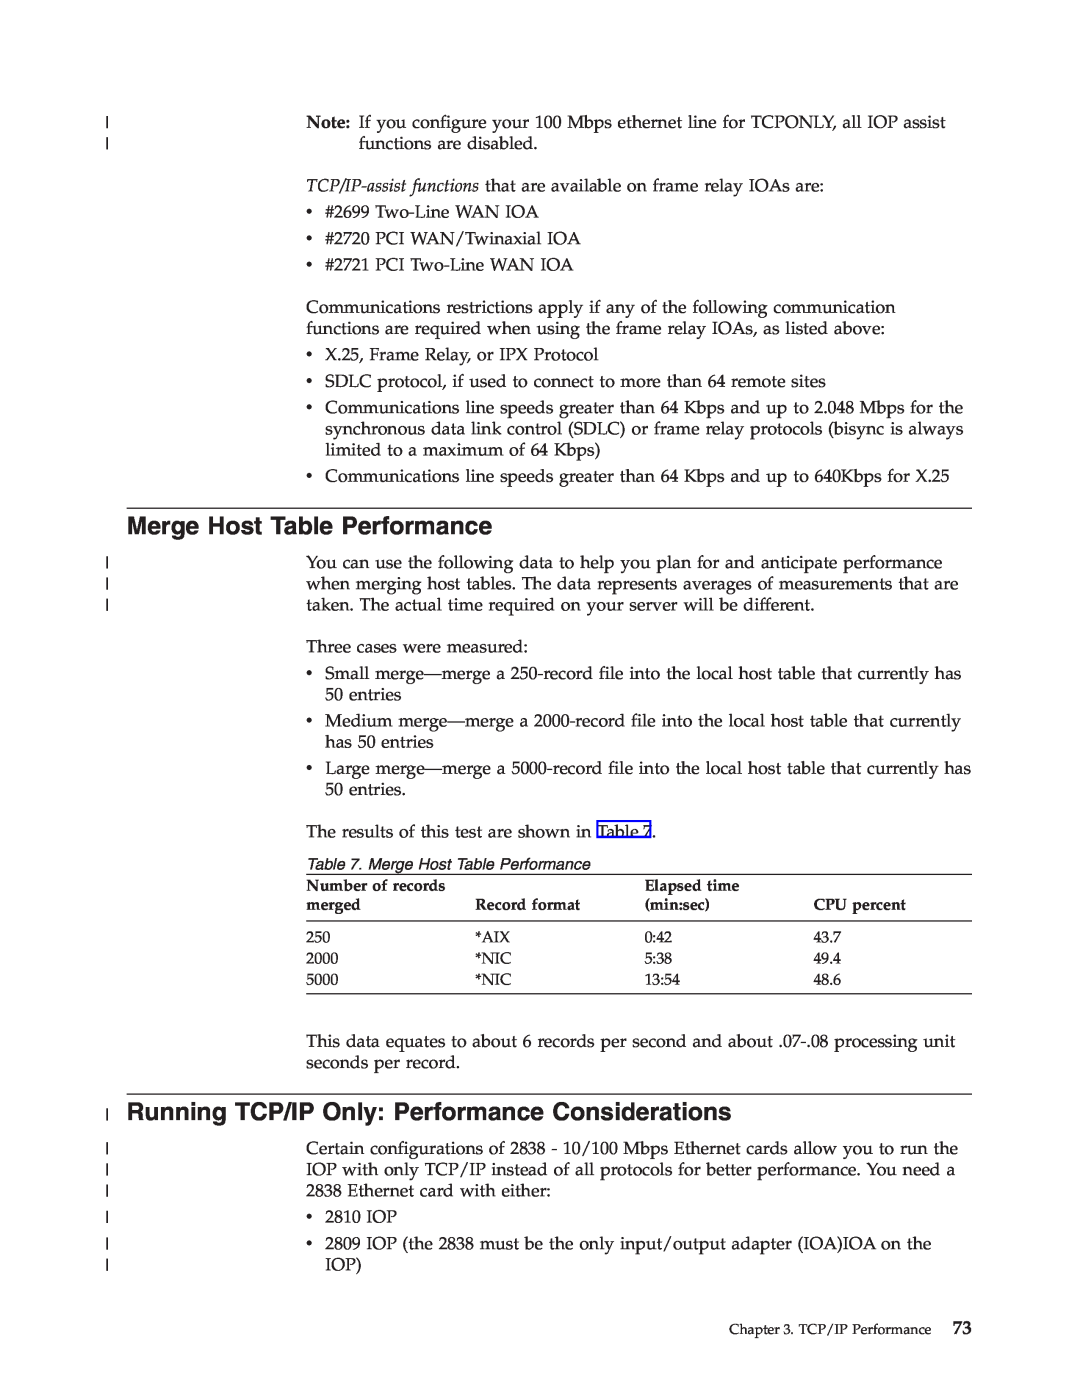 IBM SC41-5420-04 manual Merge Host Table Performance, Running TCP/IP Only: Performance Considerations 